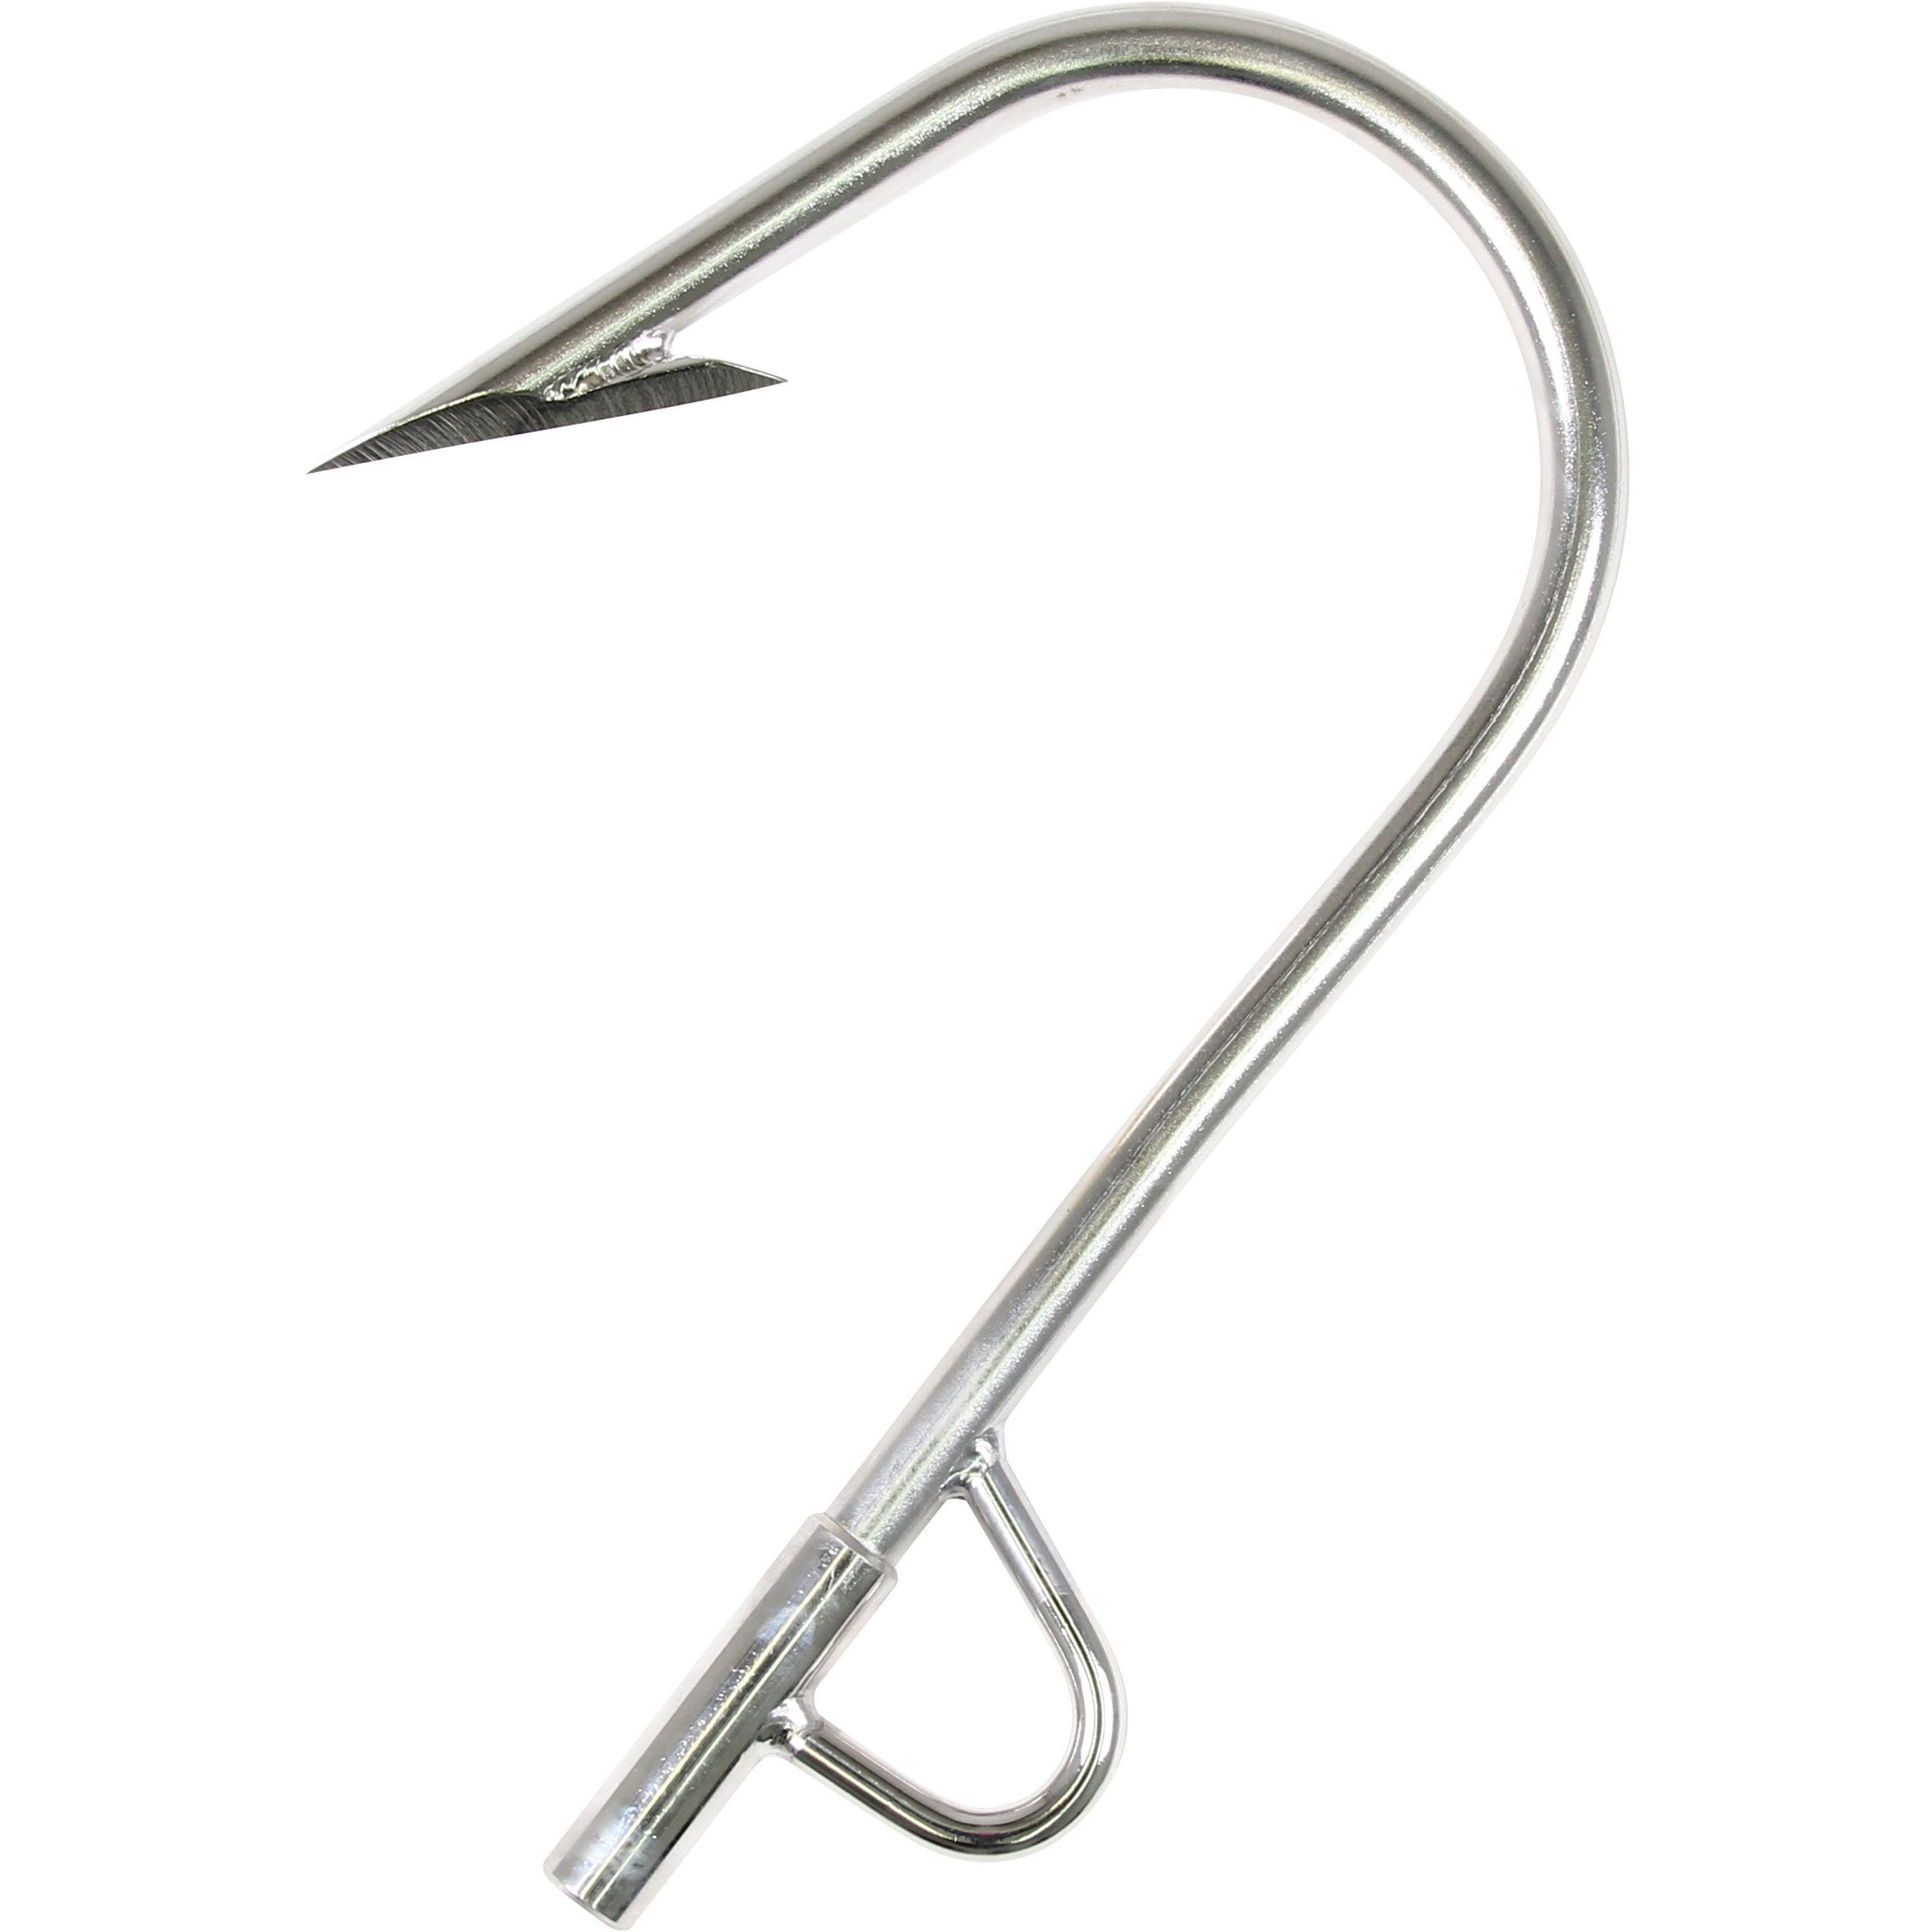 AFTCO Flying Gaff Hook, 5 Stainless Steel